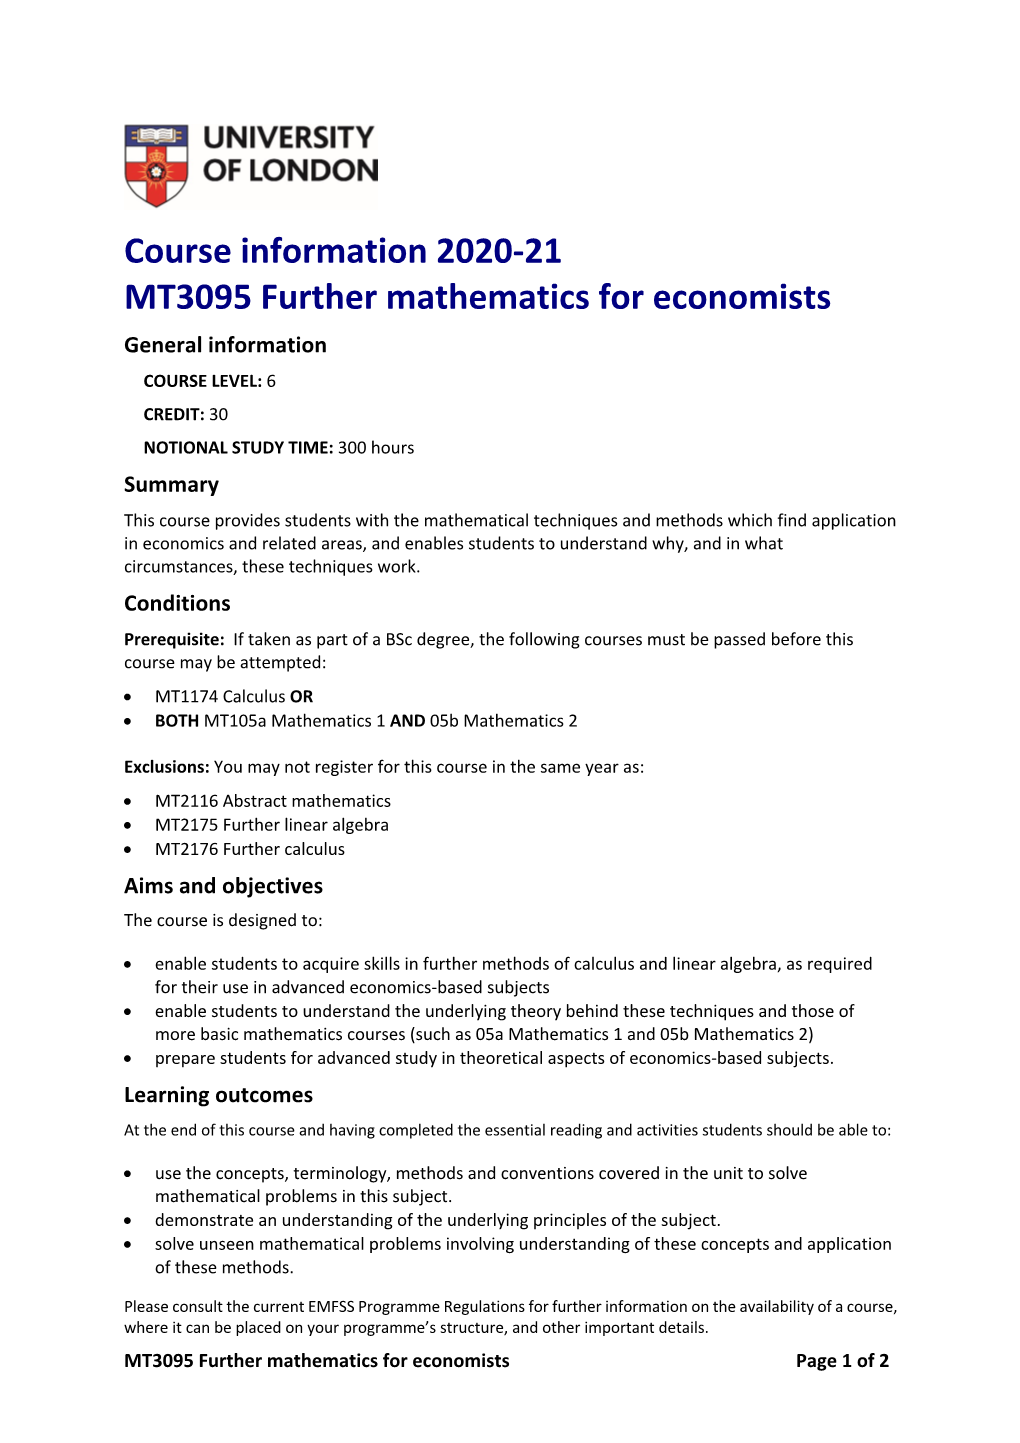 Course Information 2020-21 MT3095 Further Mathematics for Economists